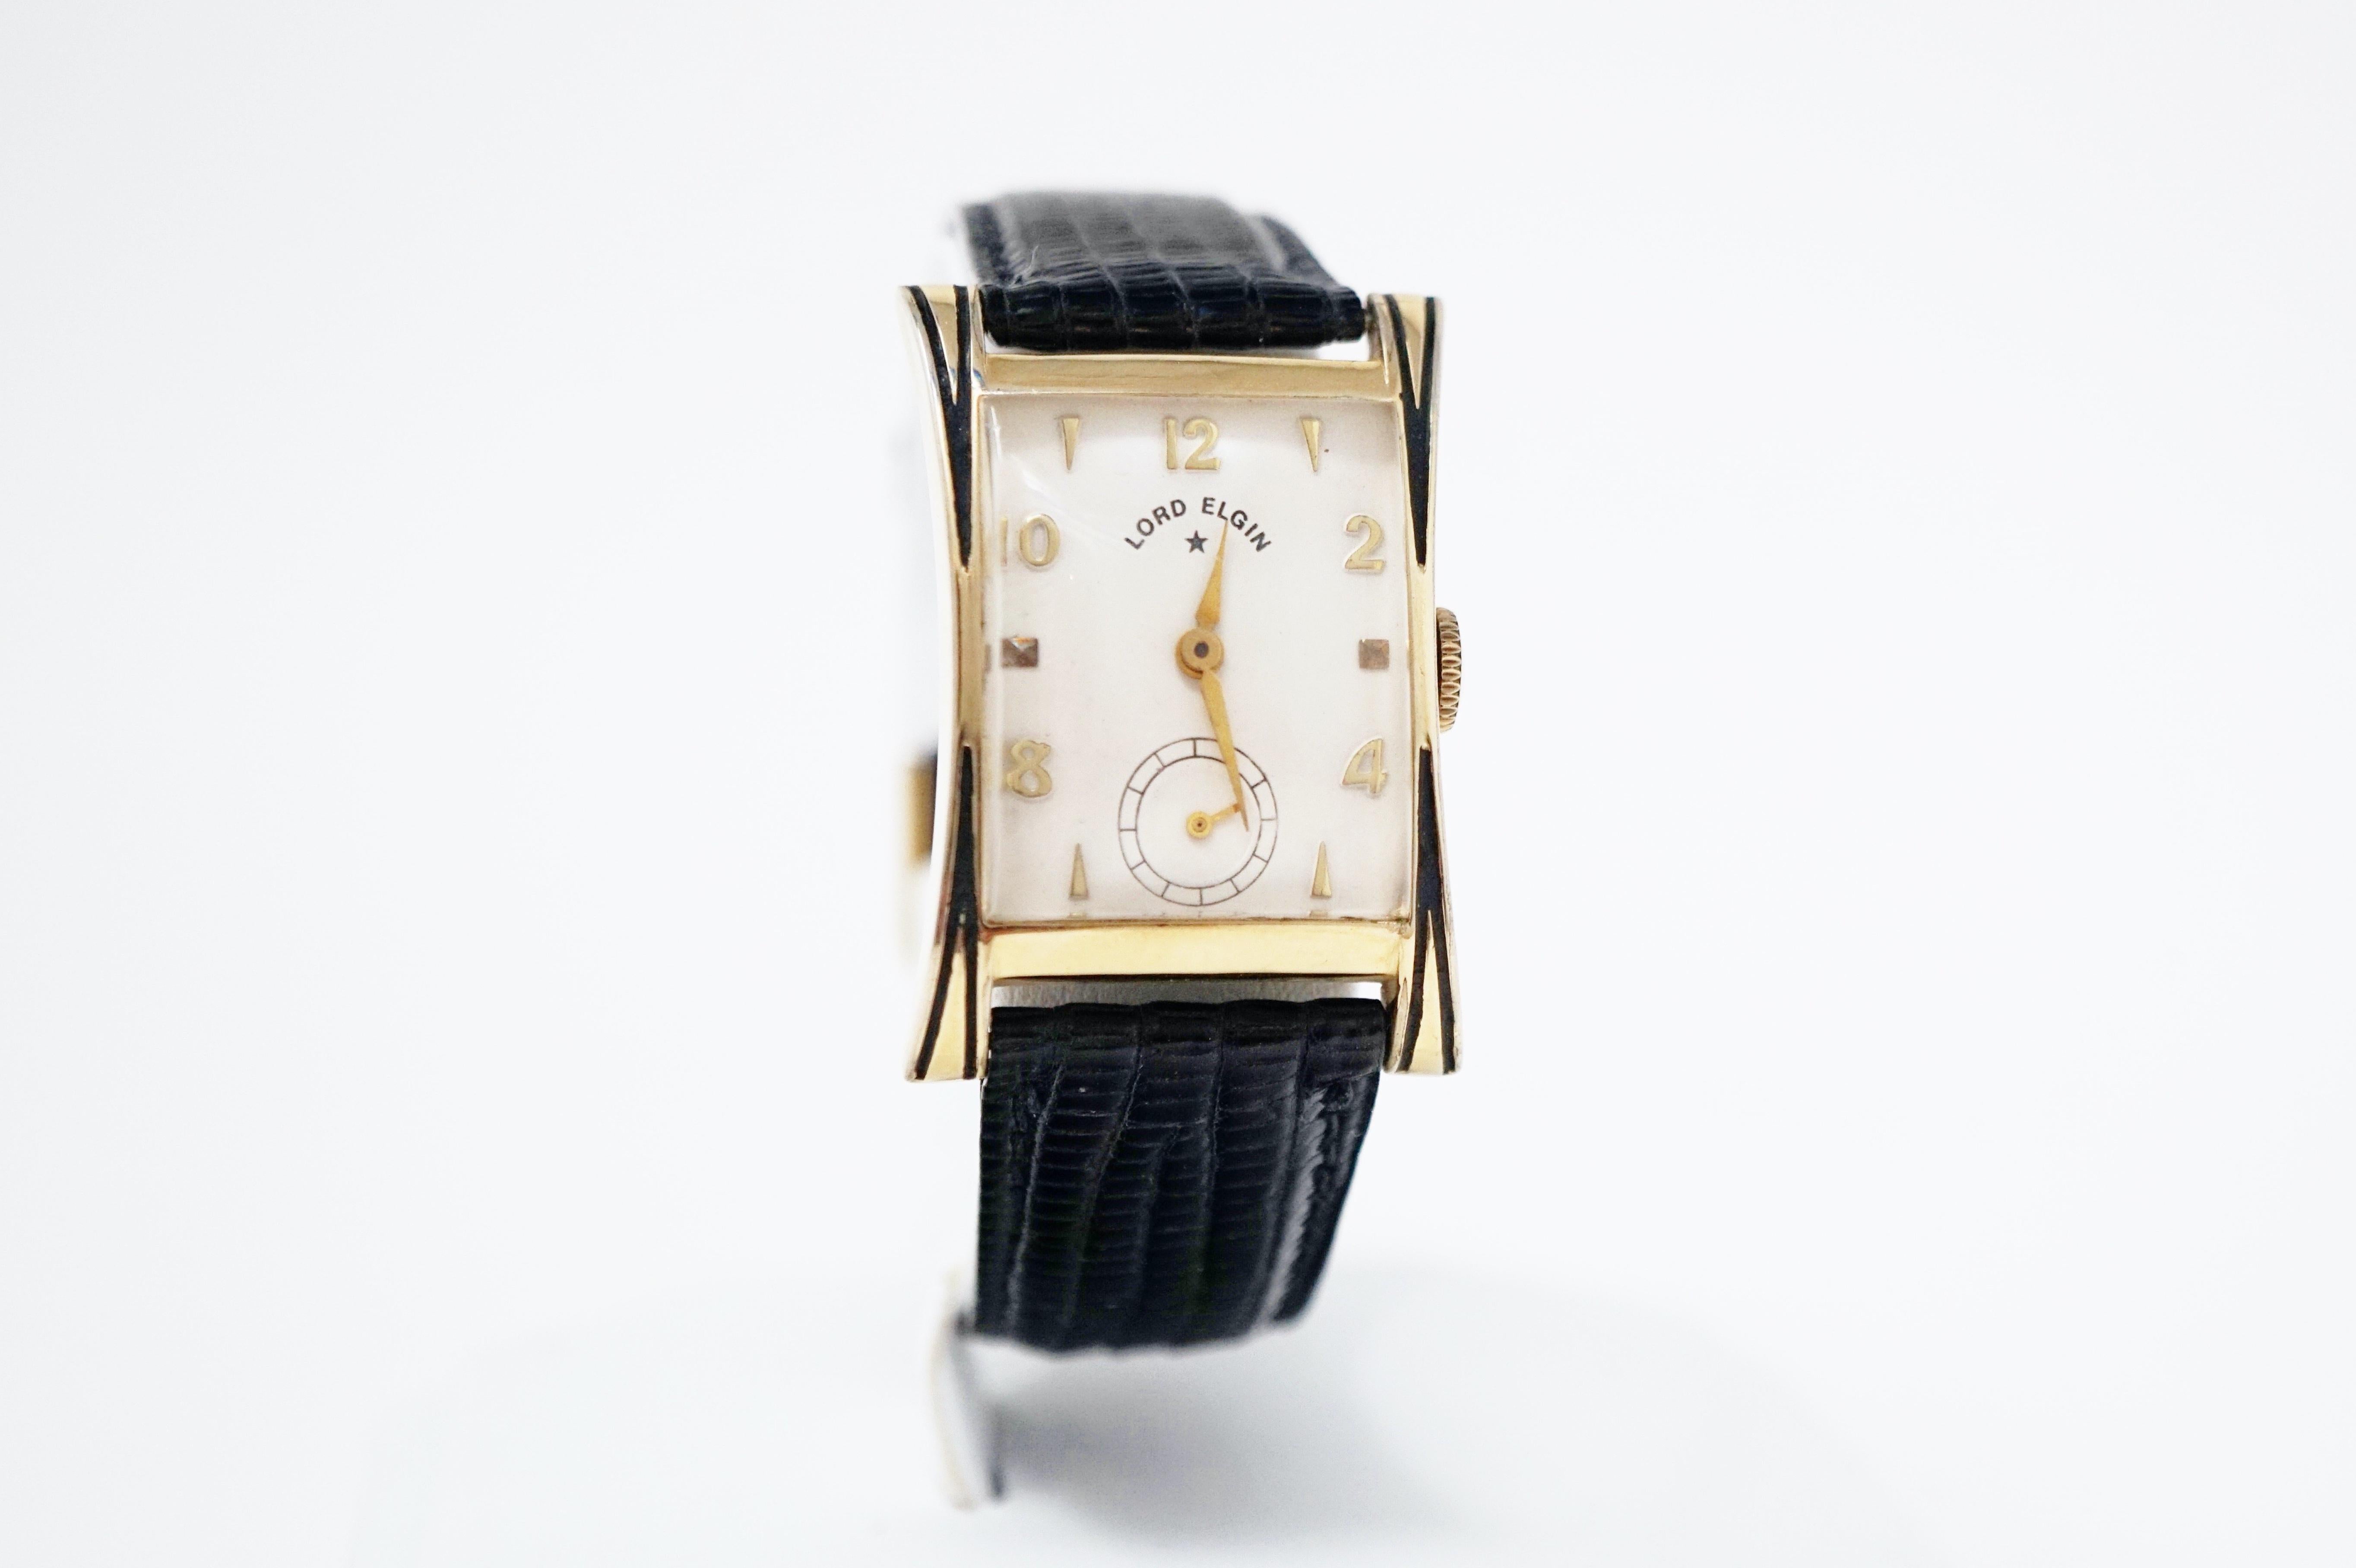 lord elgin watch 14k gold filled